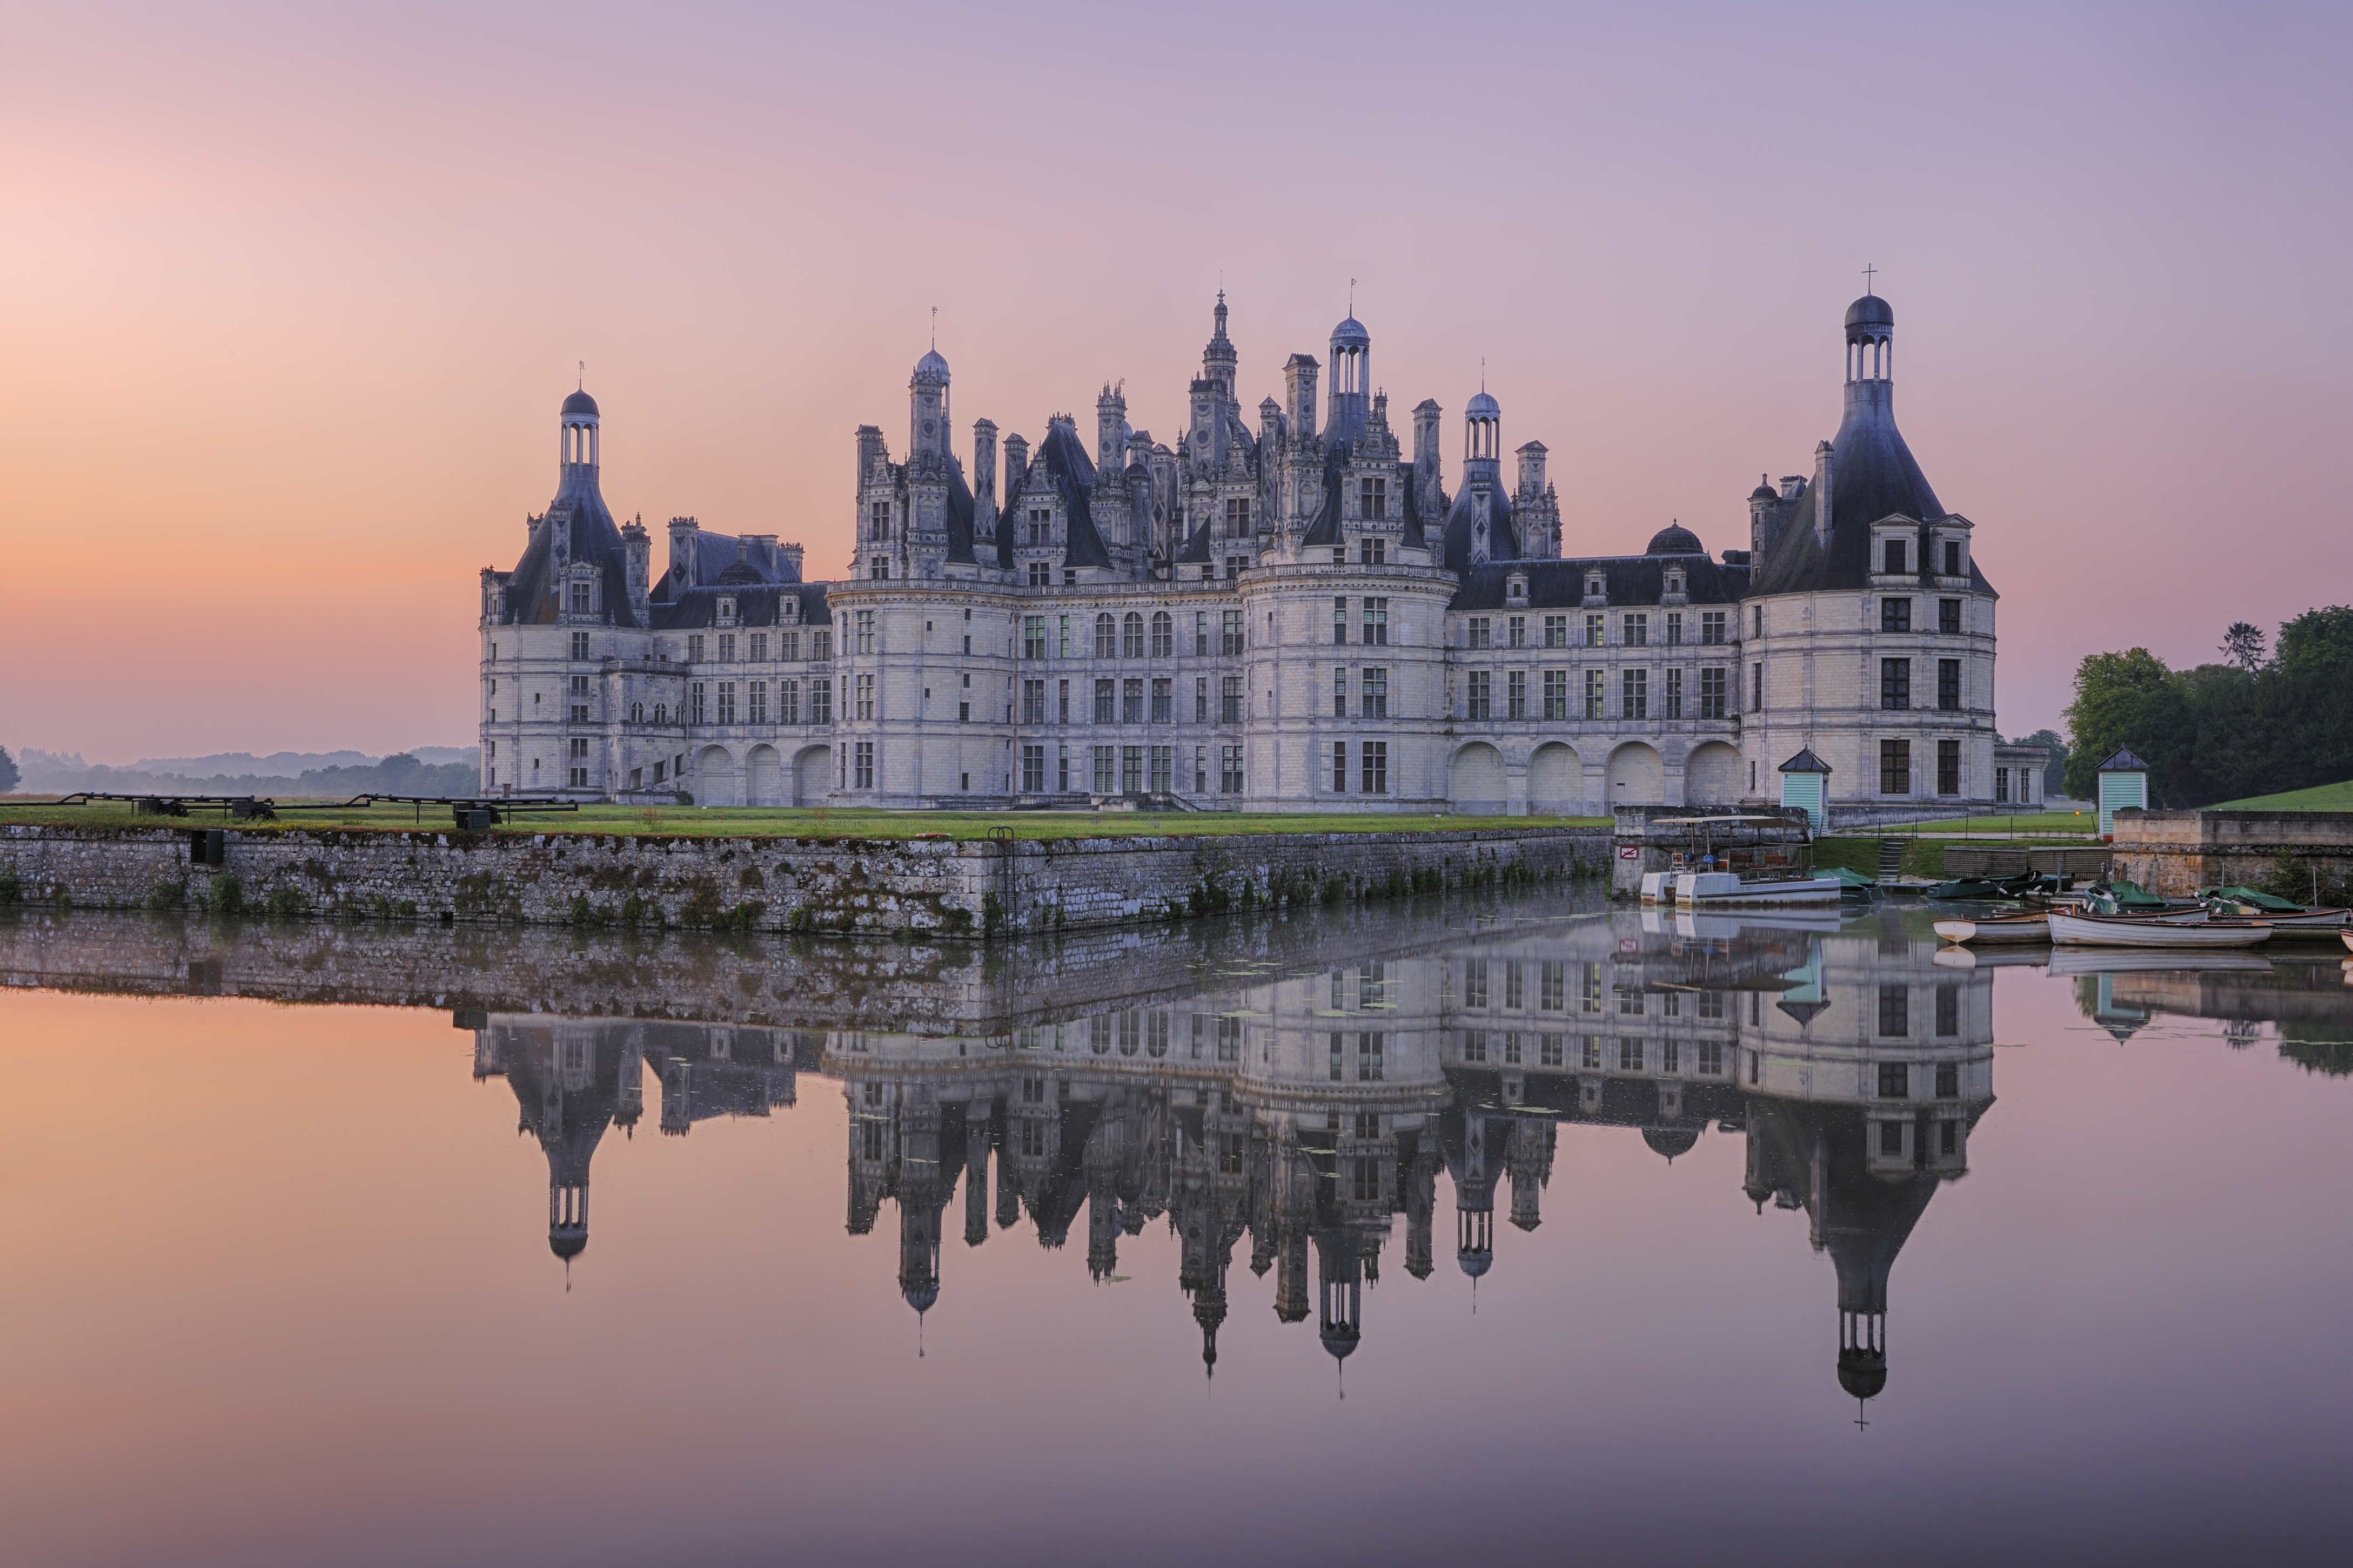 Château de Chambord | France Attractions - Lonely Planet